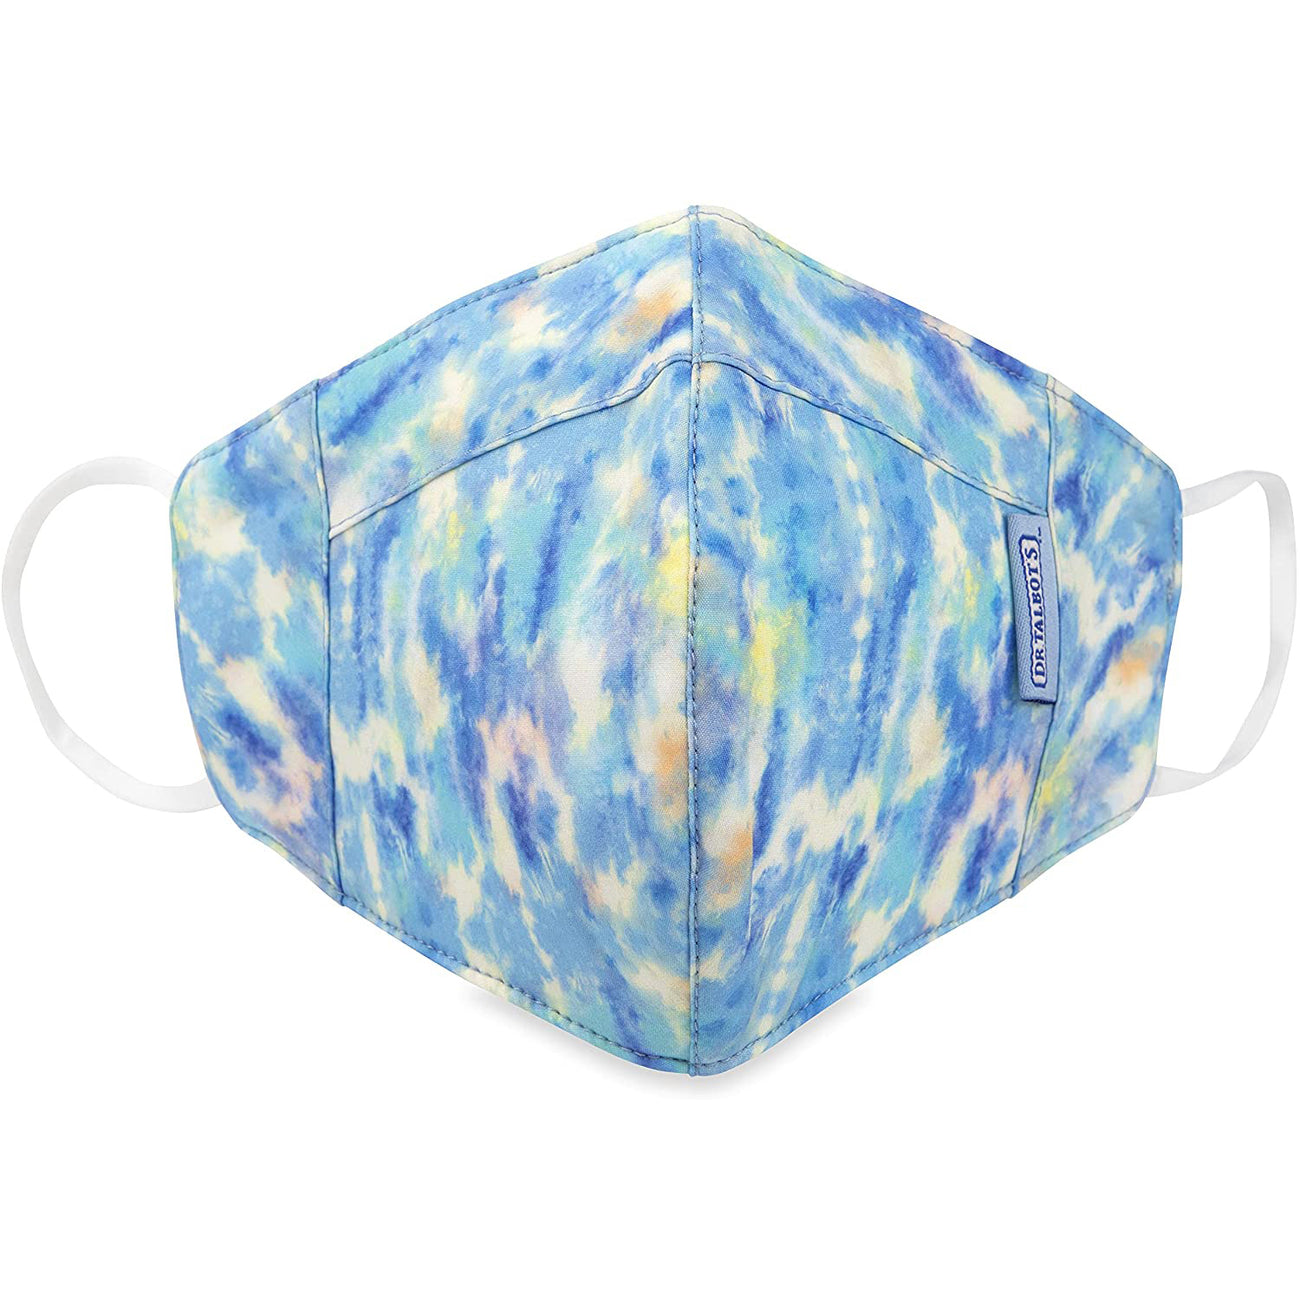 Adult Cup-style Cloth Mask - 1 pack - Blue & Pastel Water Colors - Dr Talbot's US